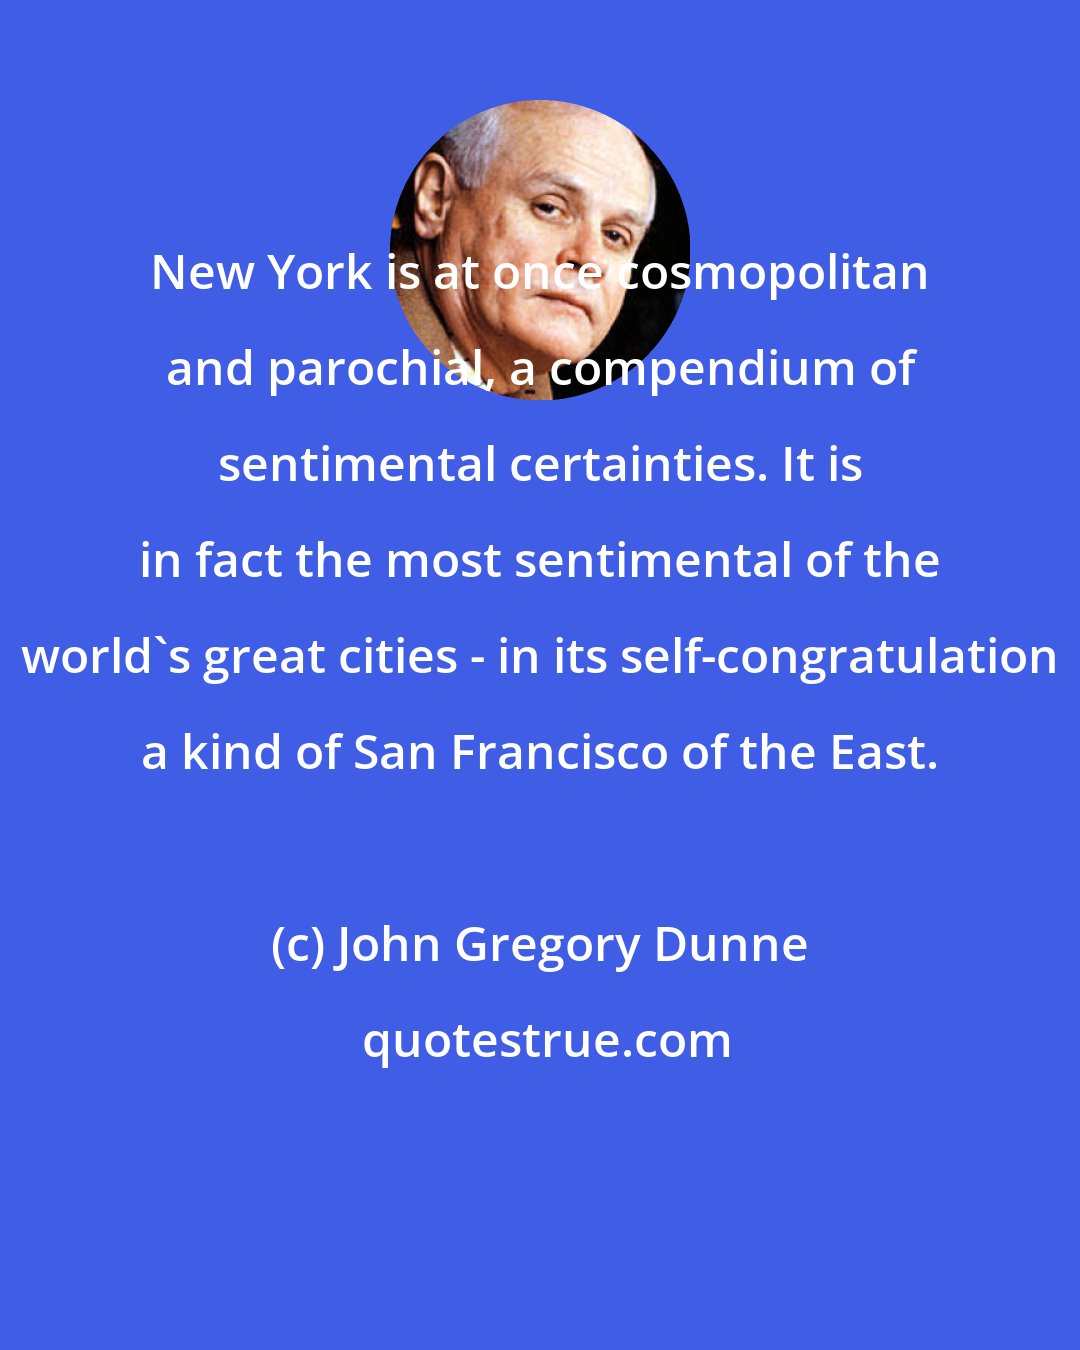 John Gregory Dunne: New York is at once cosmopolitan and parochial, a compendium of sentimental certainties. It is in fact the most sentimental of the world's great cities - in its self-congratulation a kind of San Francisco of the East.